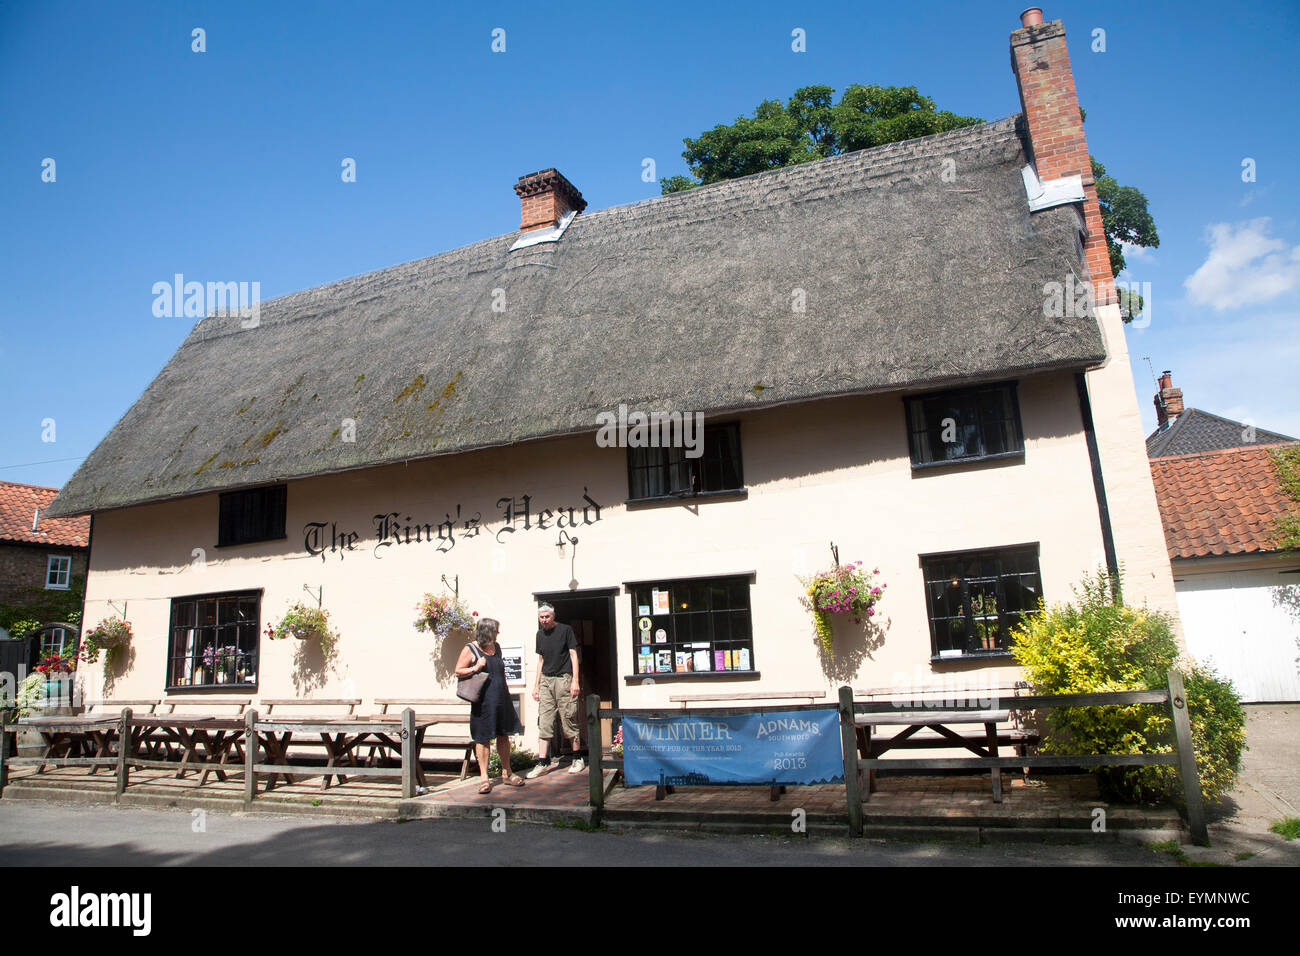 The King's Head pub, known as the Low House, Laxfield, Suffolk, England, UK Stock Photo